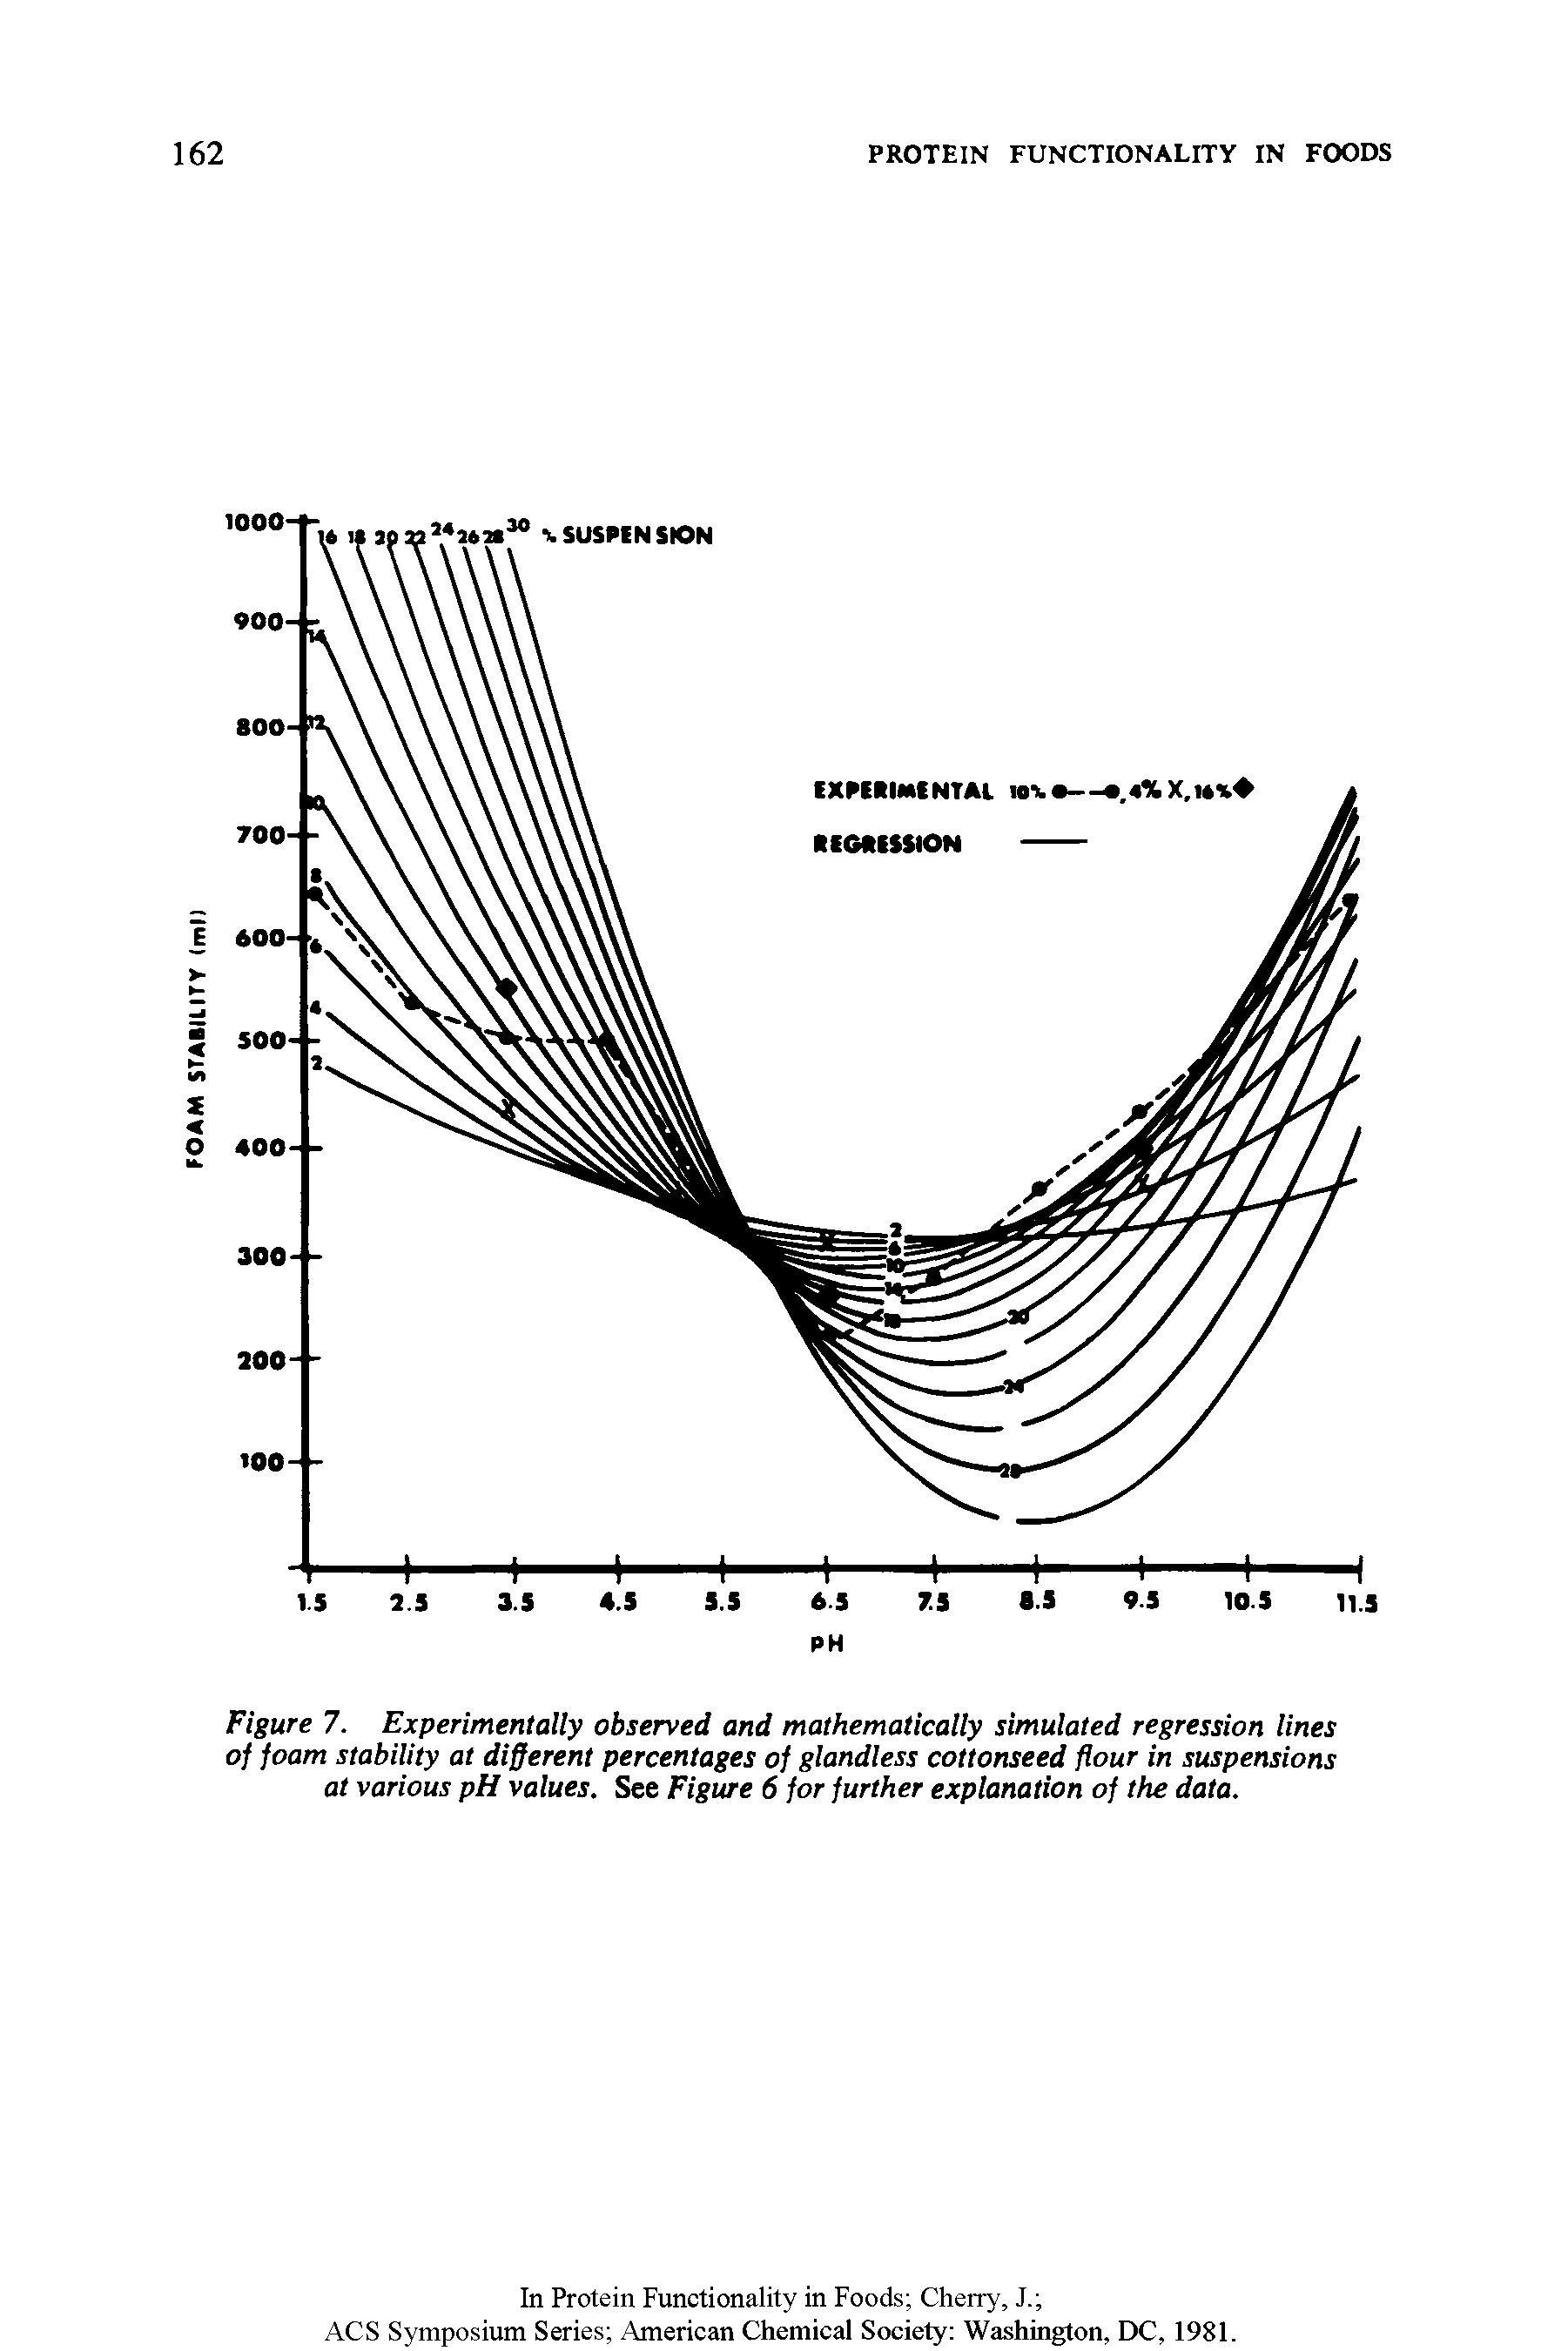 Figure 7. Experimentally observed and mathematically simulated regression lines of foam stability at different percentages of glandless cottonseed flour in suspensions at various pH values. See Figure 6 for further explanation of the data.